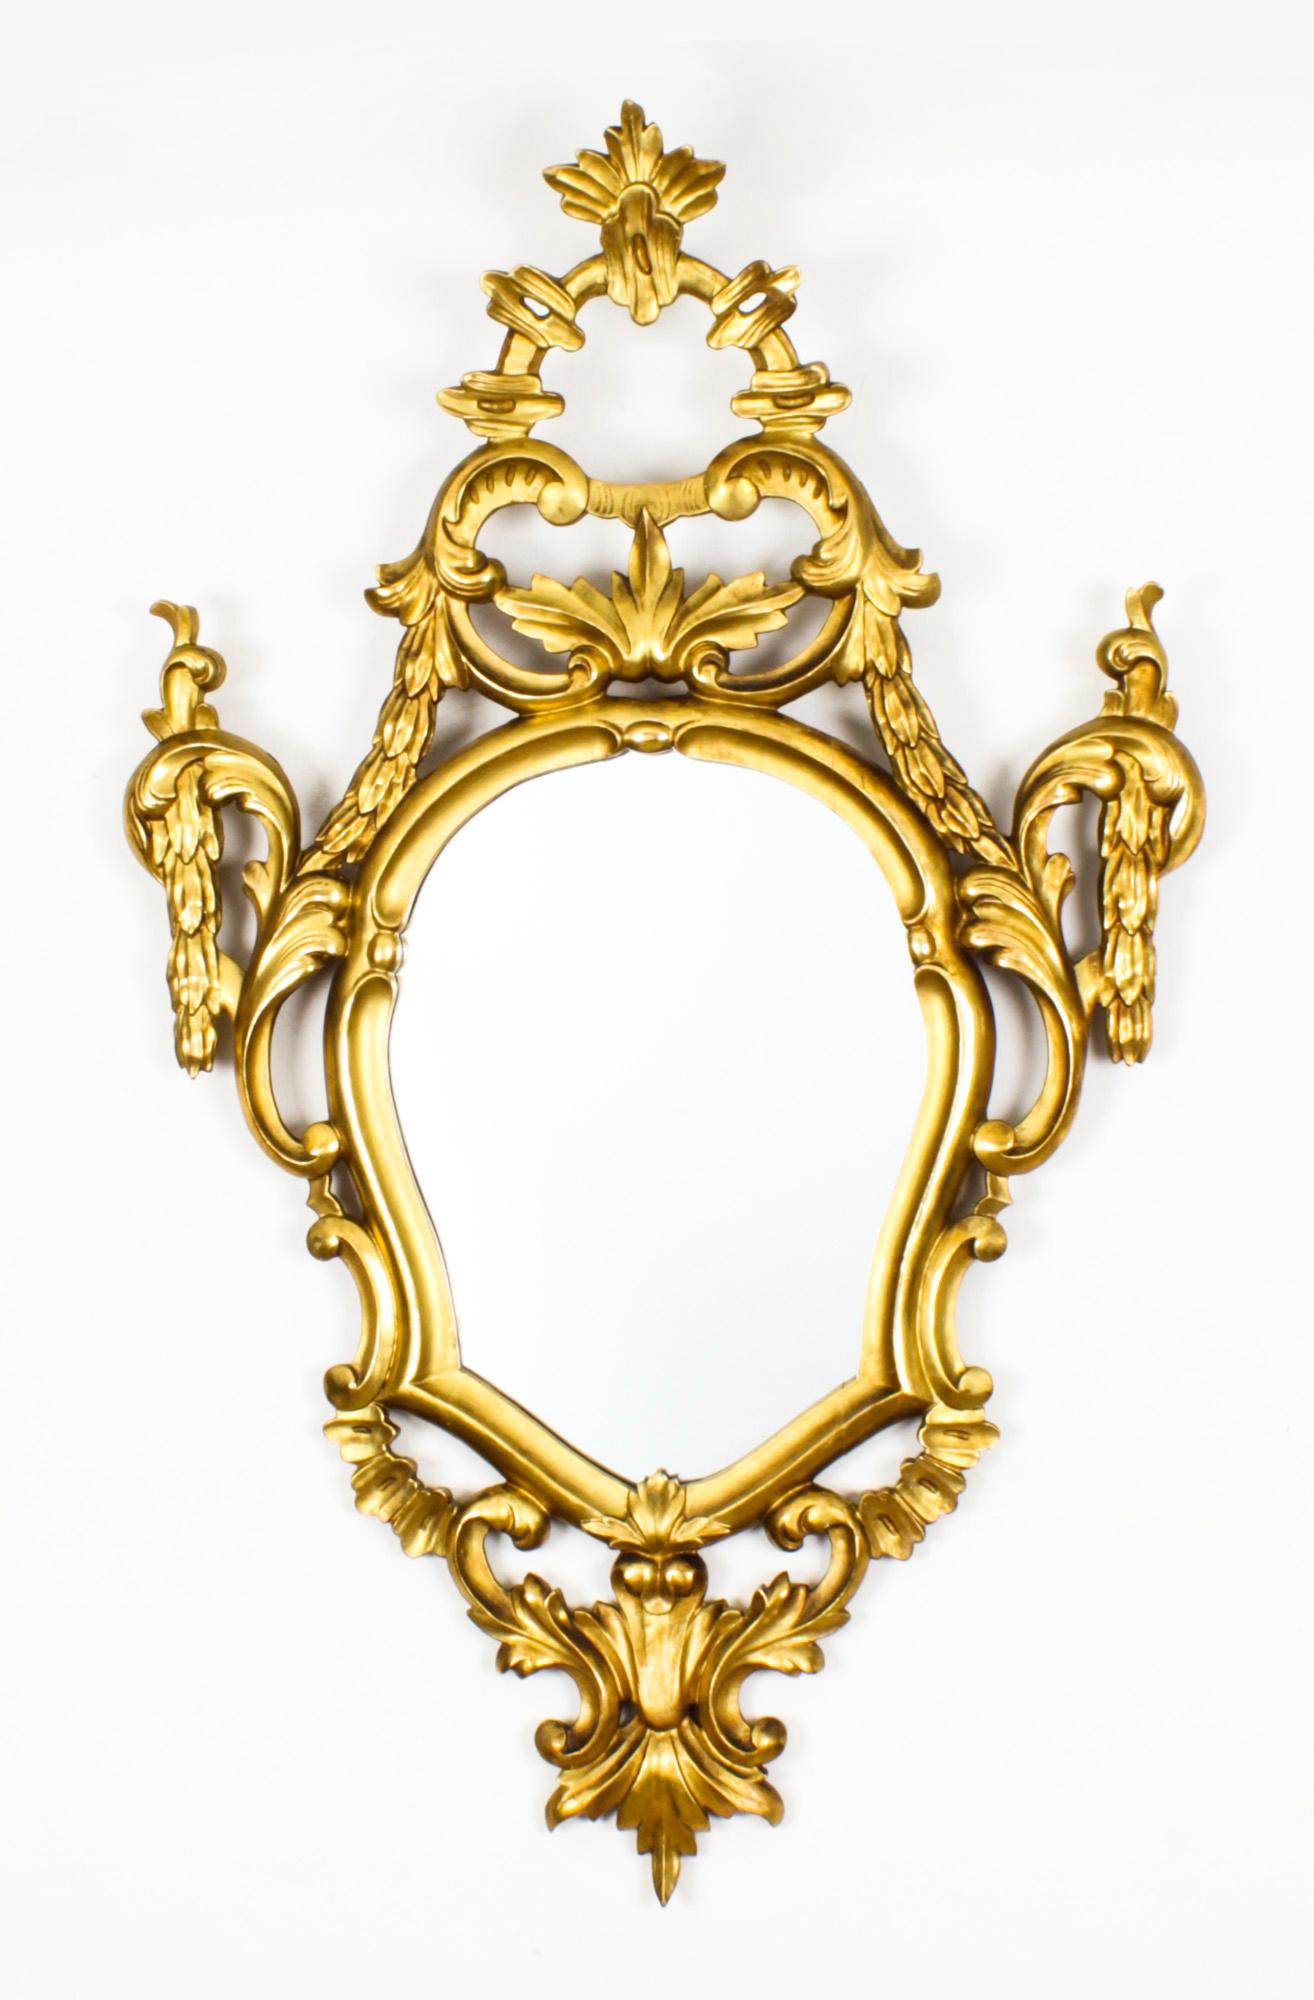 This is a superb pair of antique Italian Florentine giltwood mirrors, circa 1870 in date.
 
The oval mirrors plates are set within a Rococo boldly-carved scrolling acanthus frame, and they retain the original gilding.
 
Florentine style refers